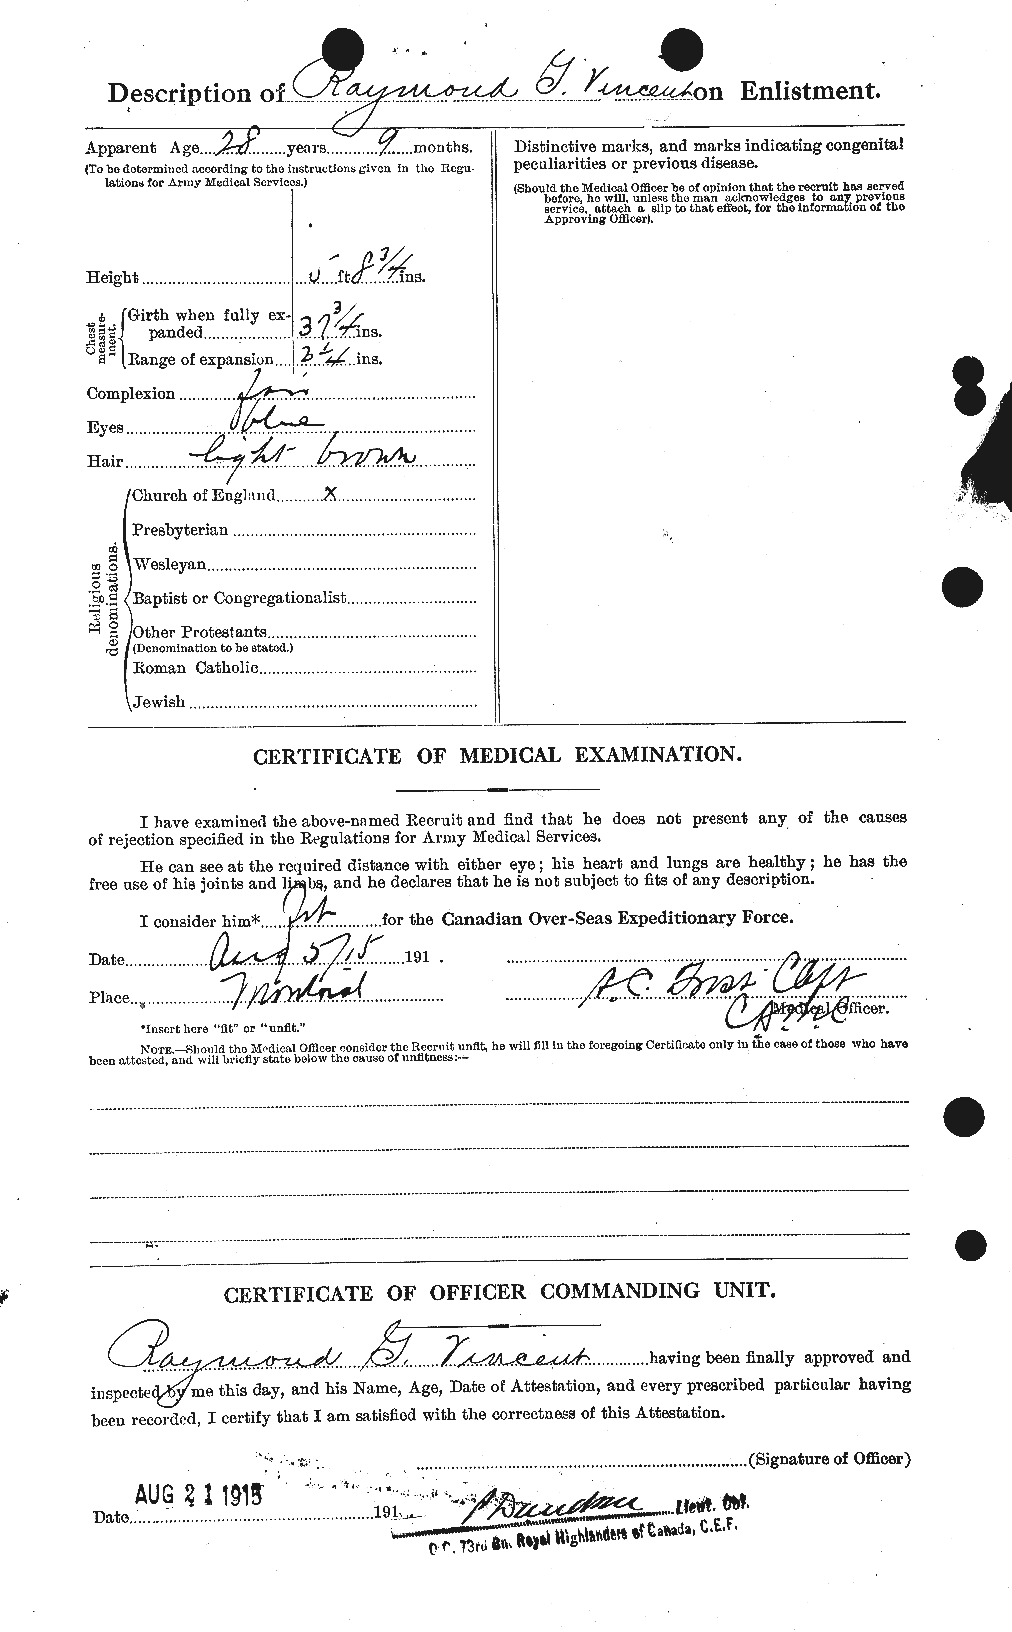 Personnel Records of the First World War - CEF 656514b